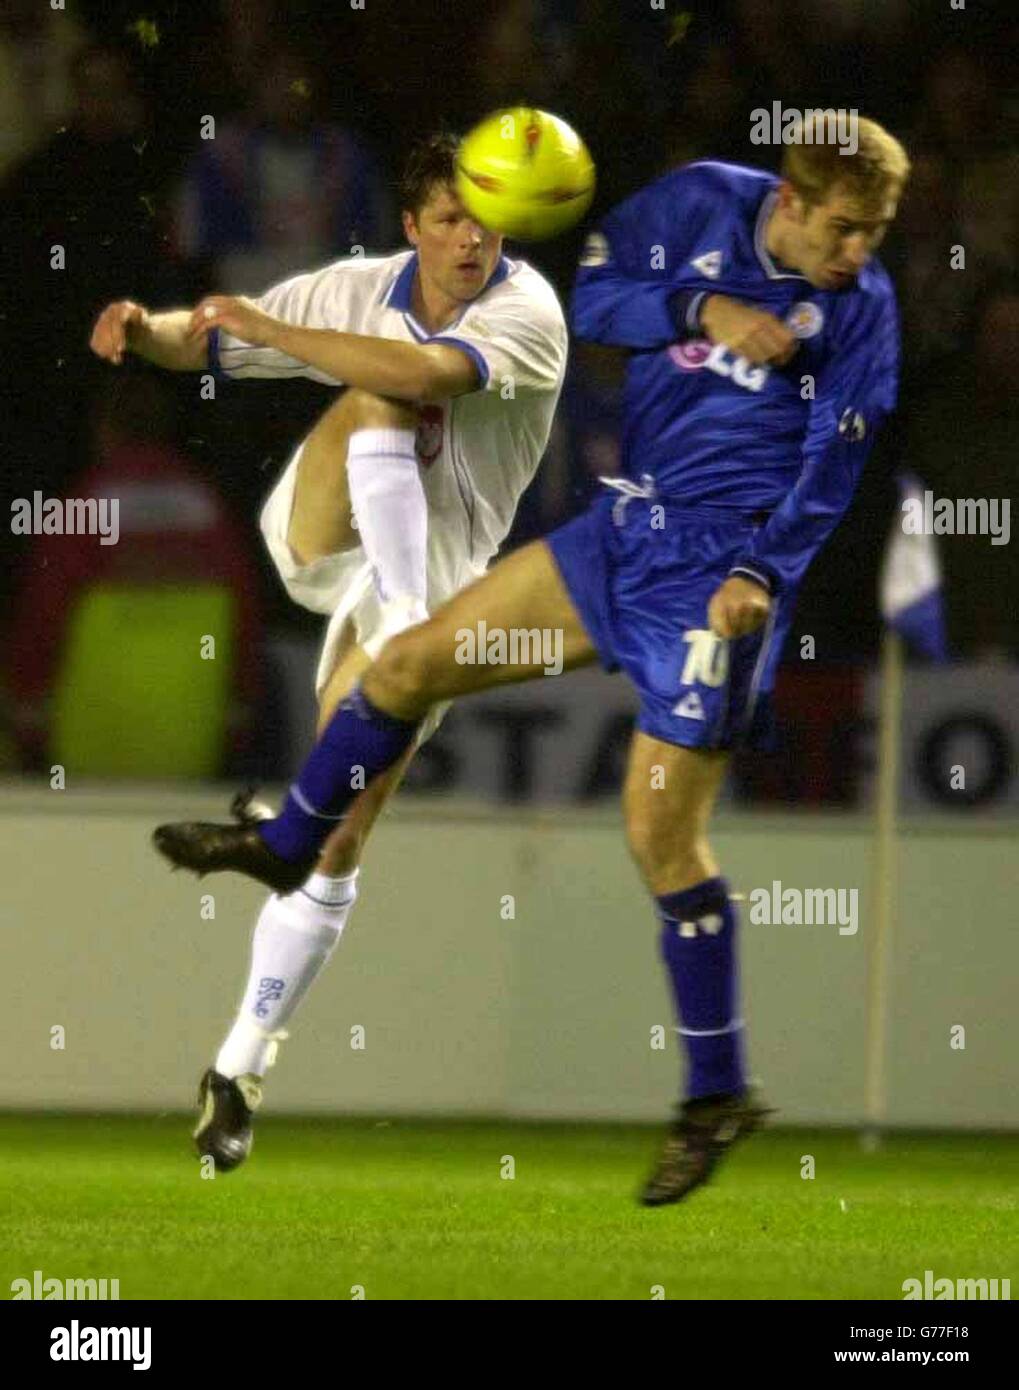 Leicester's James Scowcroft avoids Portsmouth's Arjan De Zeeuw, during the Nationwide League Division One game at the Walkers Stadium, Leicester. NO UNOFFICIAL CLUB WEBSITE USE. Stock Photo